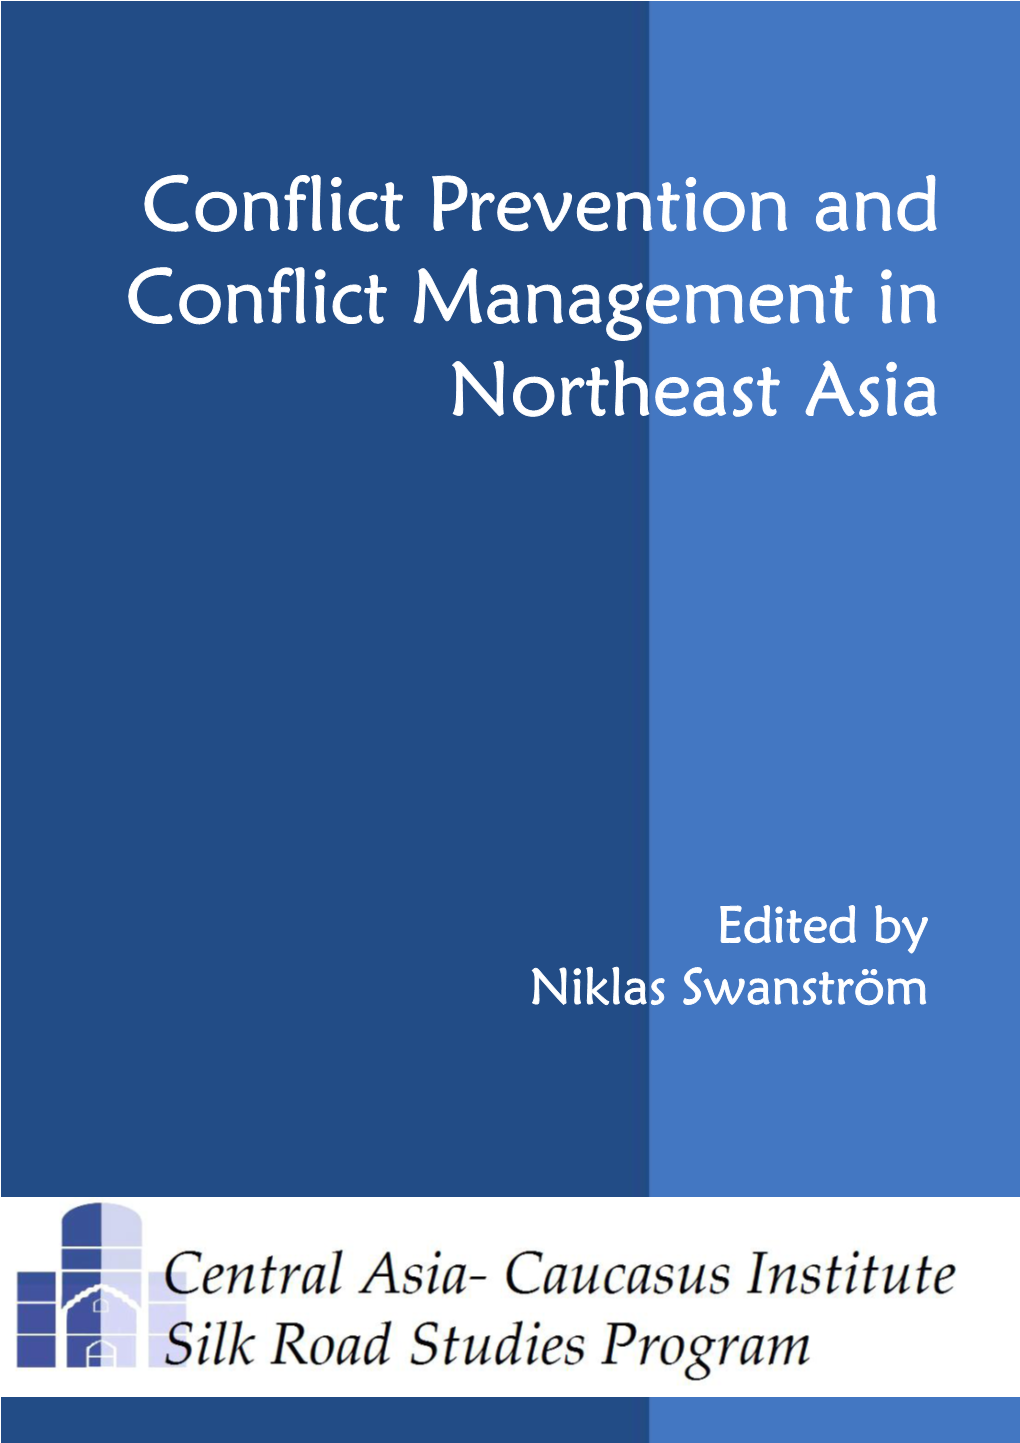 Conflict Prevention and Conflict Management in Northeast Asia